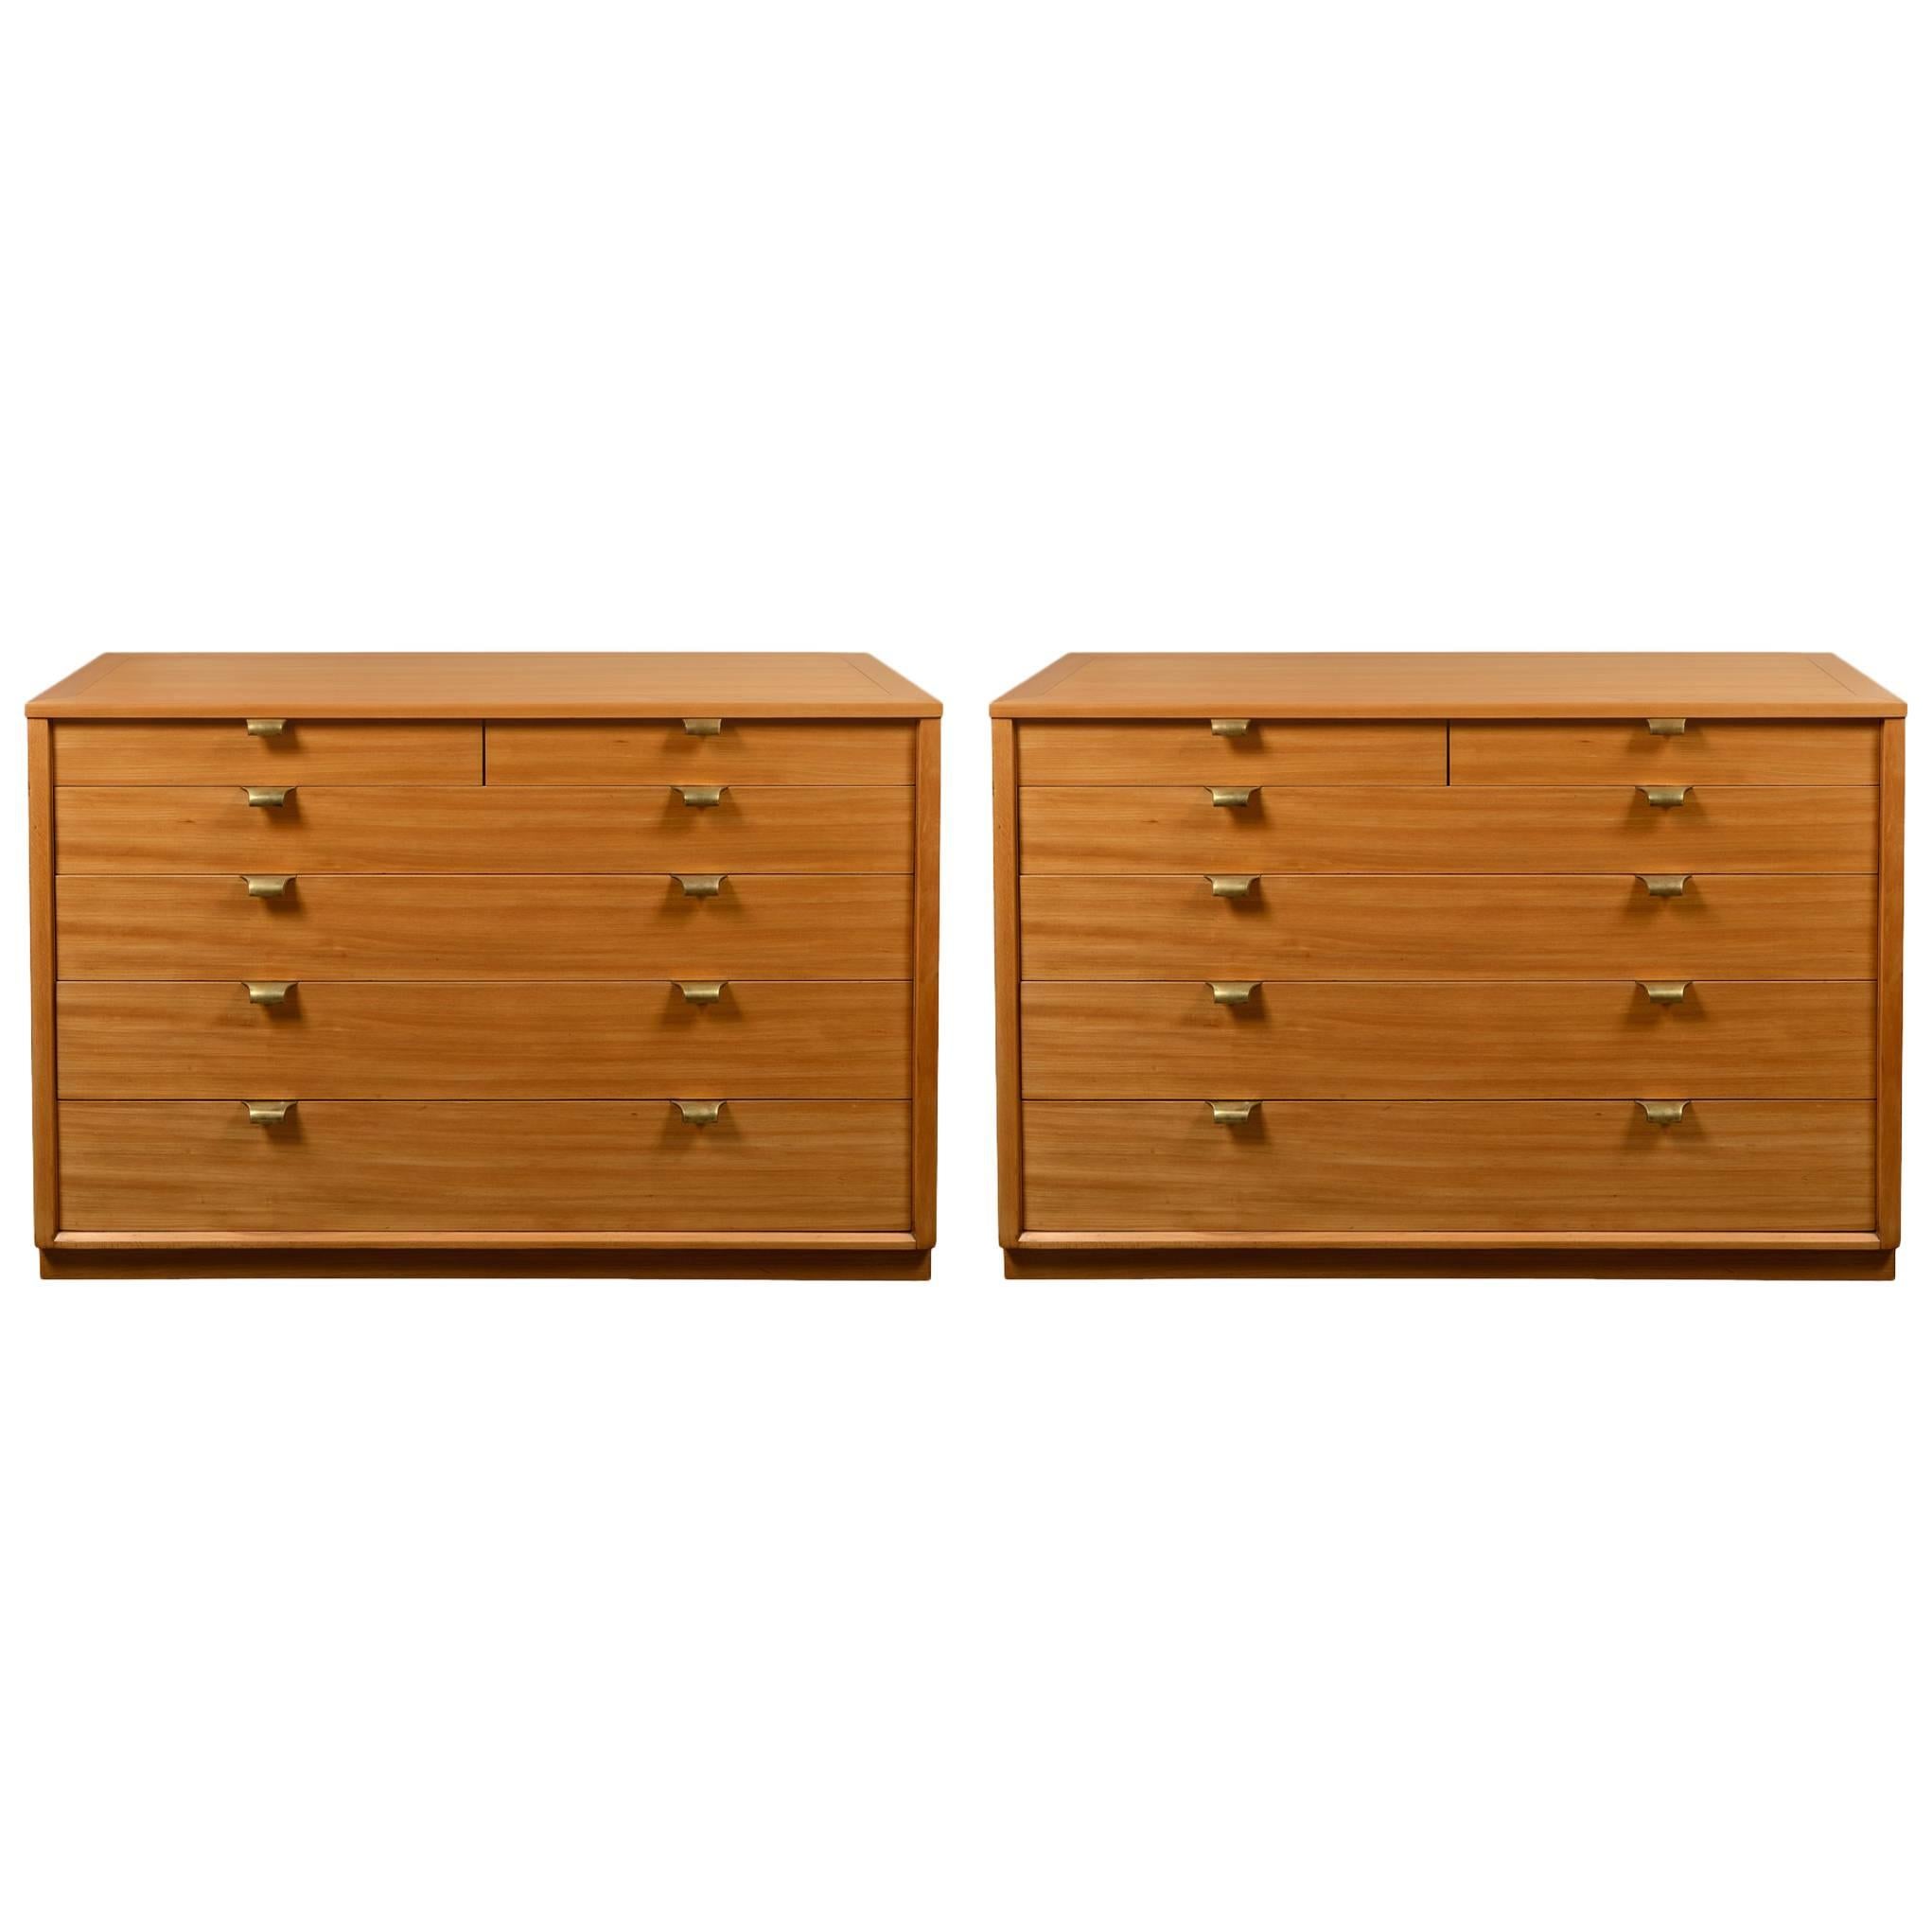 Elegant Pair of Chest of Drawers by Ed. Wormley, 1950s For Sale